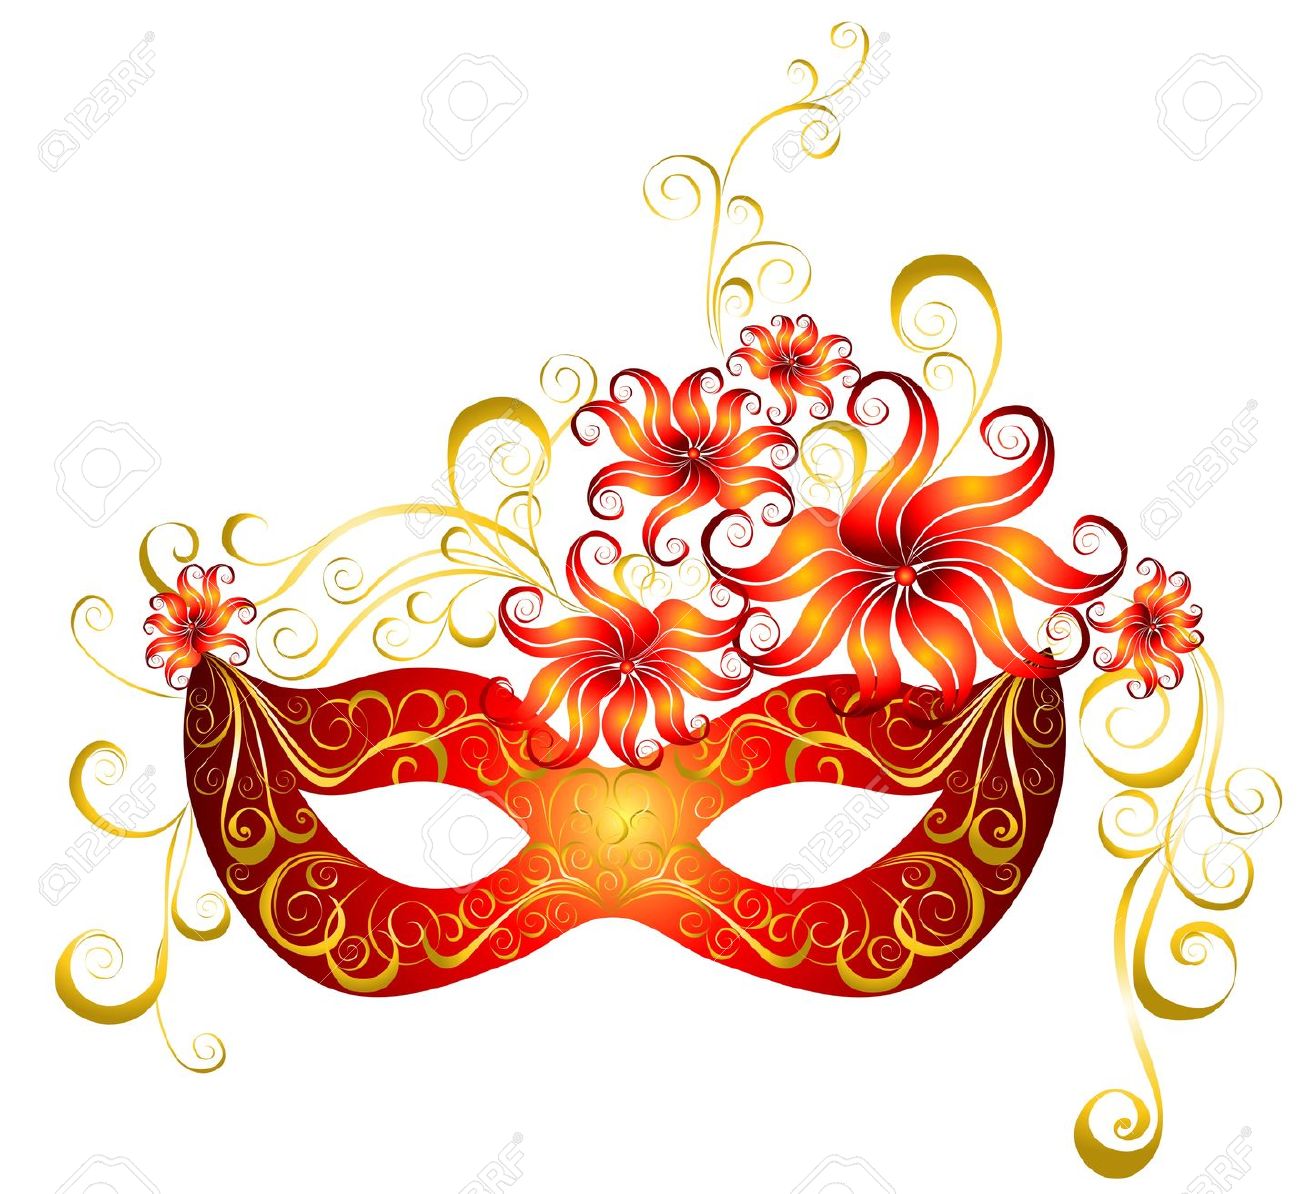 Masquerade clipart #2, Download drawings